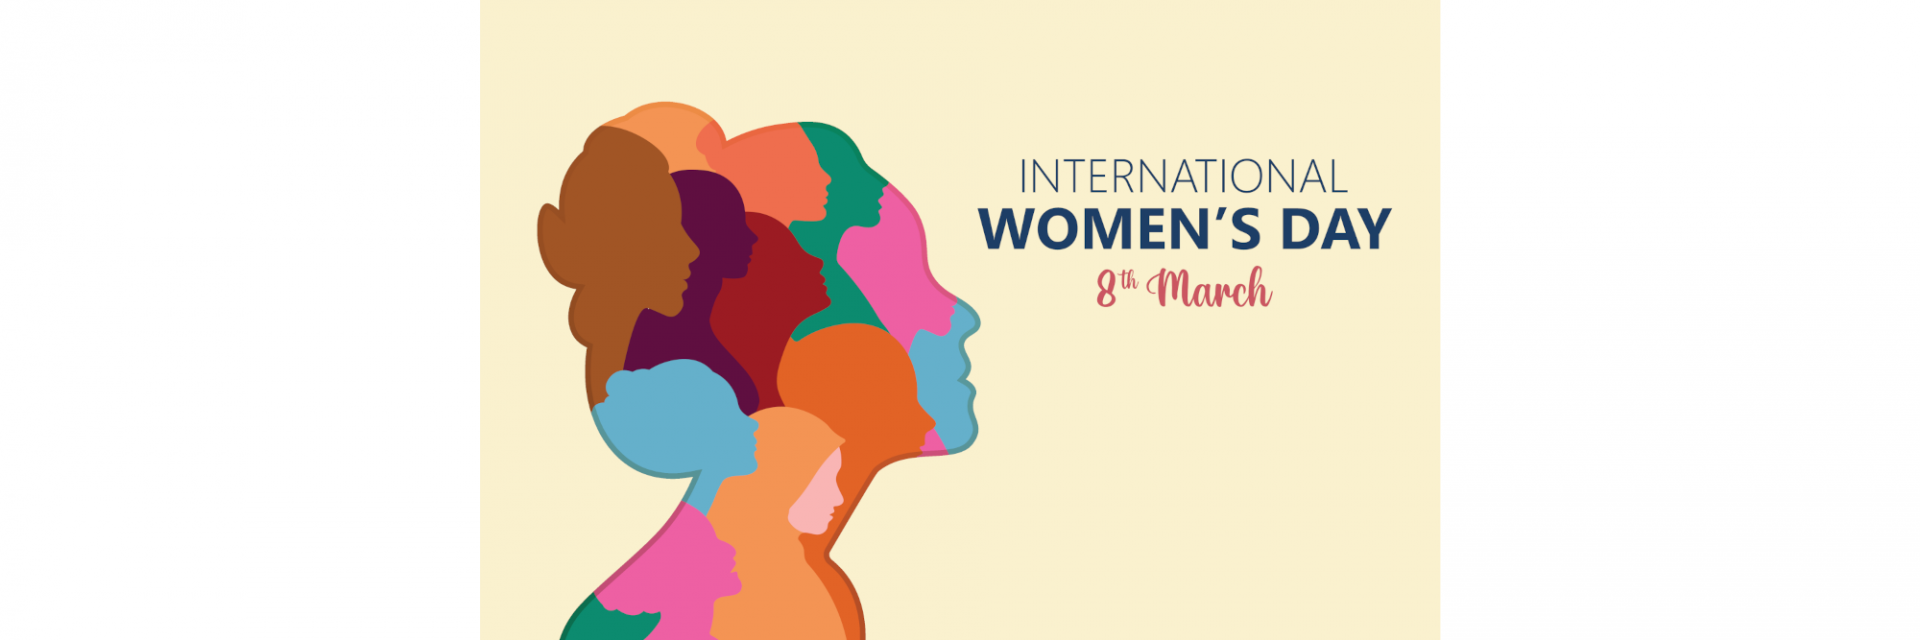 The Secretary-General’s message for International Women’s Day